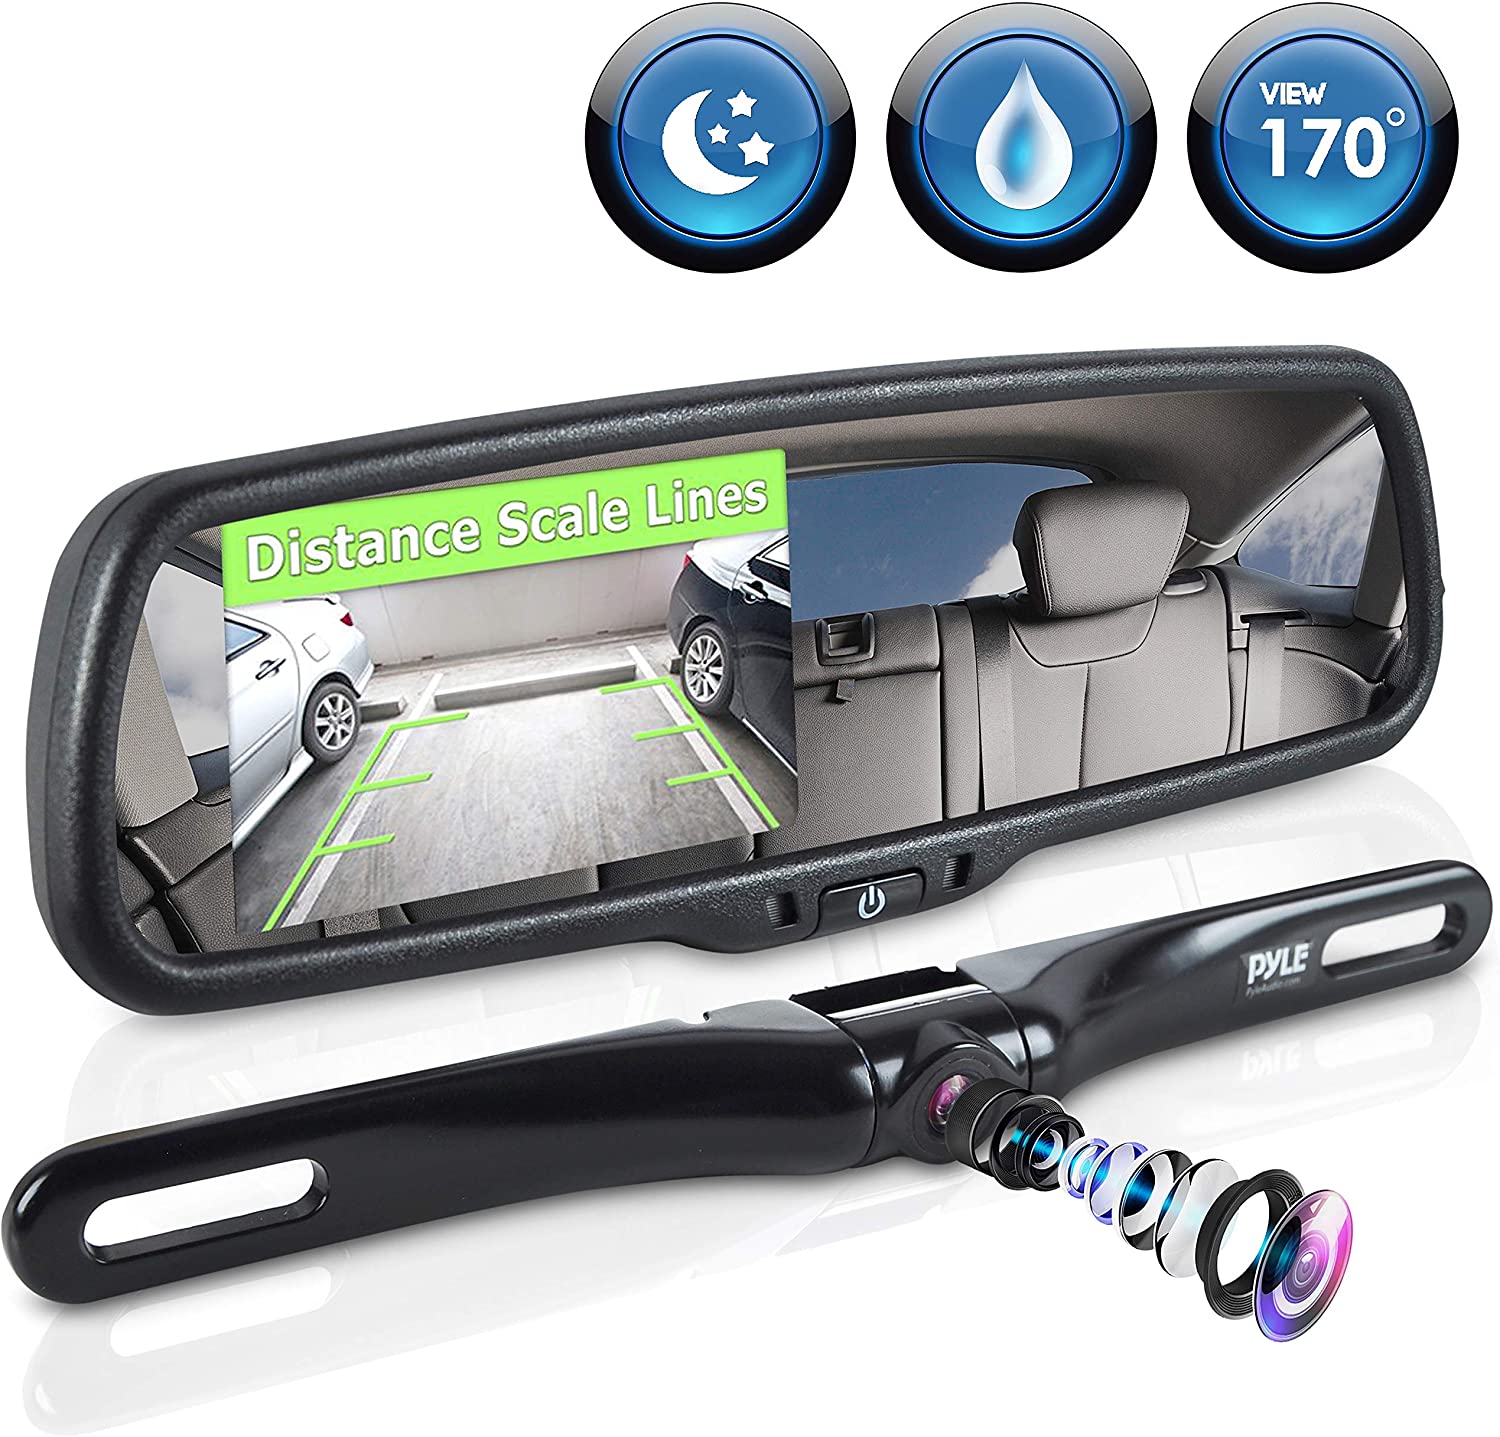 Pyle Backup Car Camera Rear View Mirror Screen Monitor System with Parking & Reverse Safety Distance Scale Lines, OEM Fit, Waterproof & Night Vision, 170° Angle Adjustable, 4.3